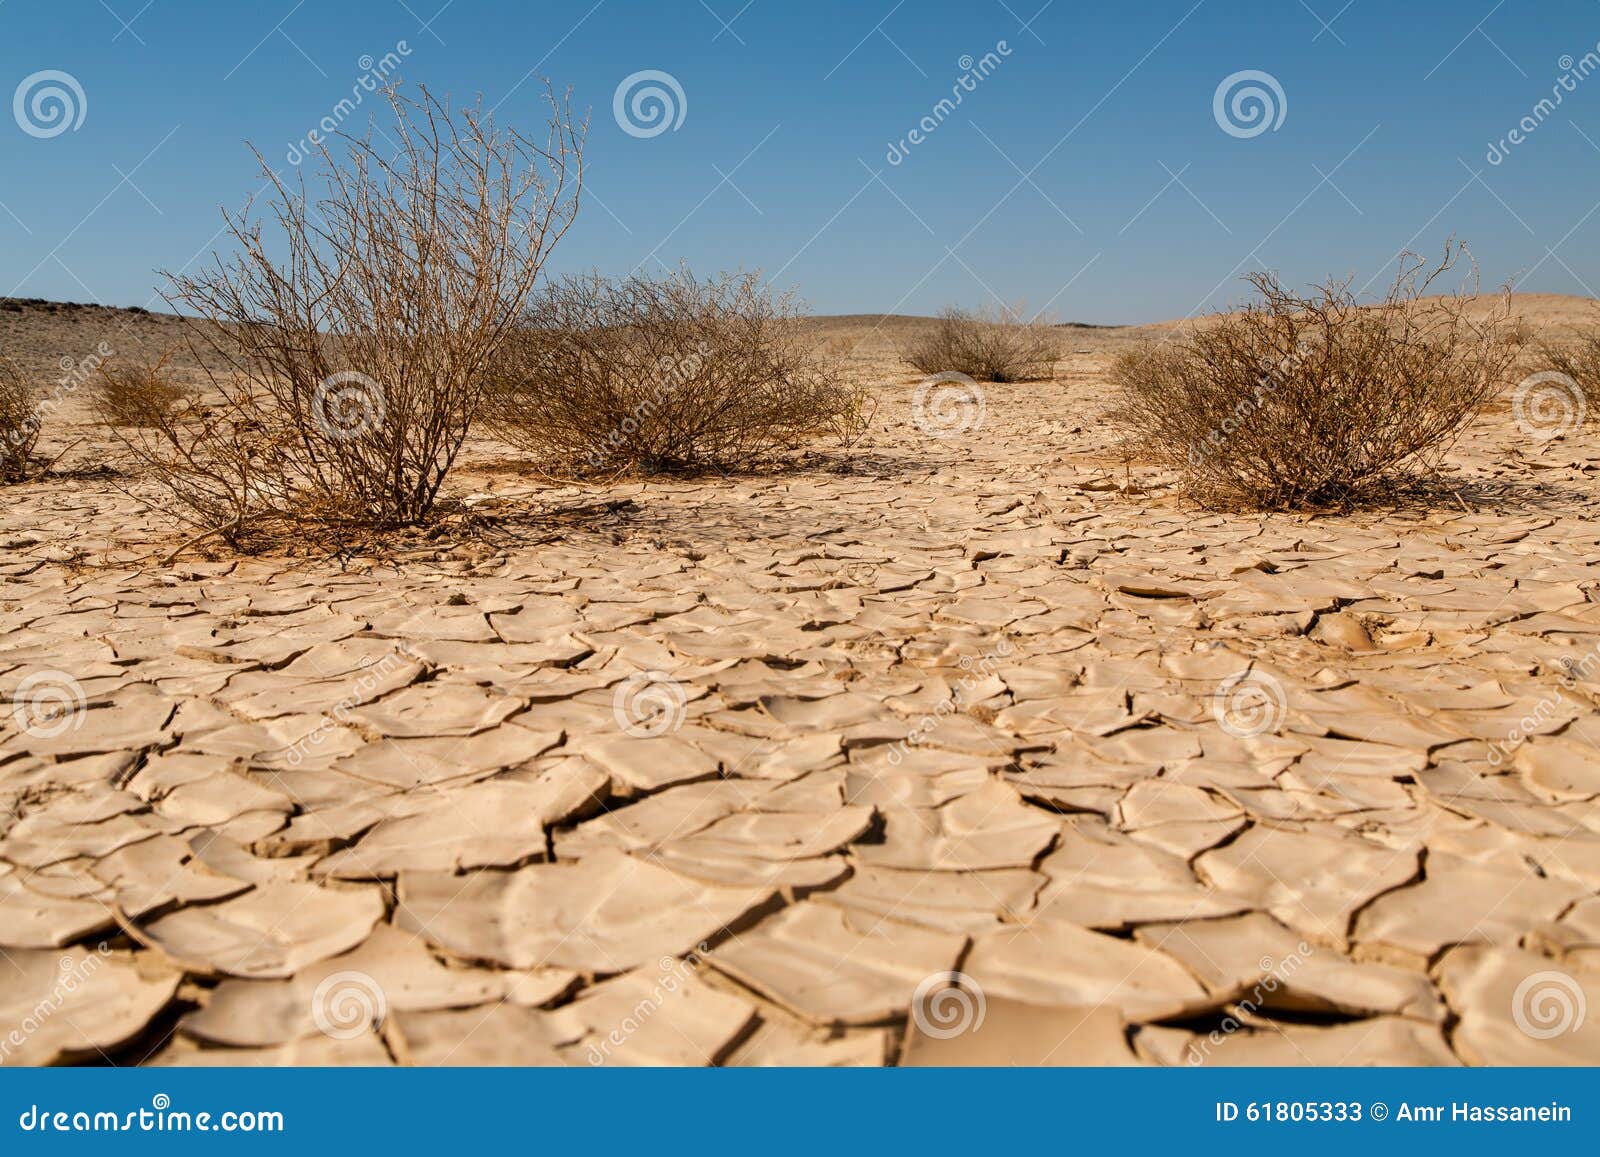 drought and desertification